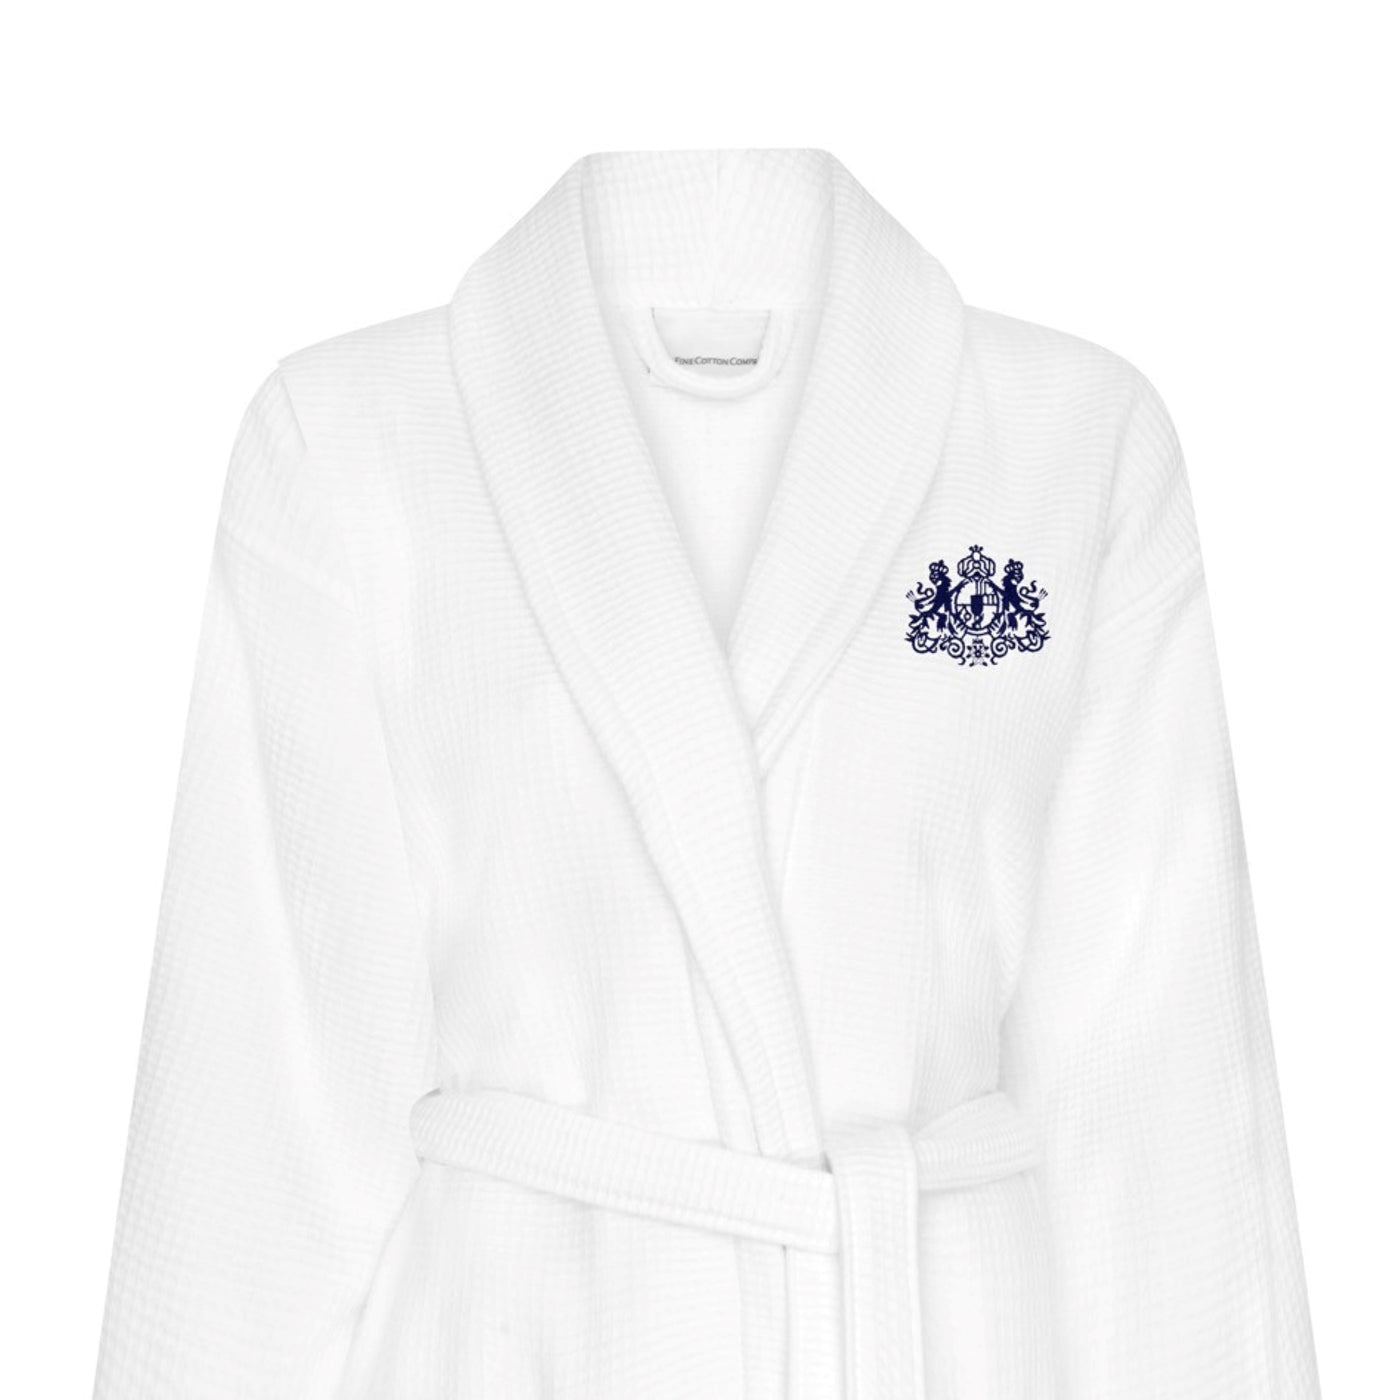 Crest or Motif Embroidered Bath Robe Collection